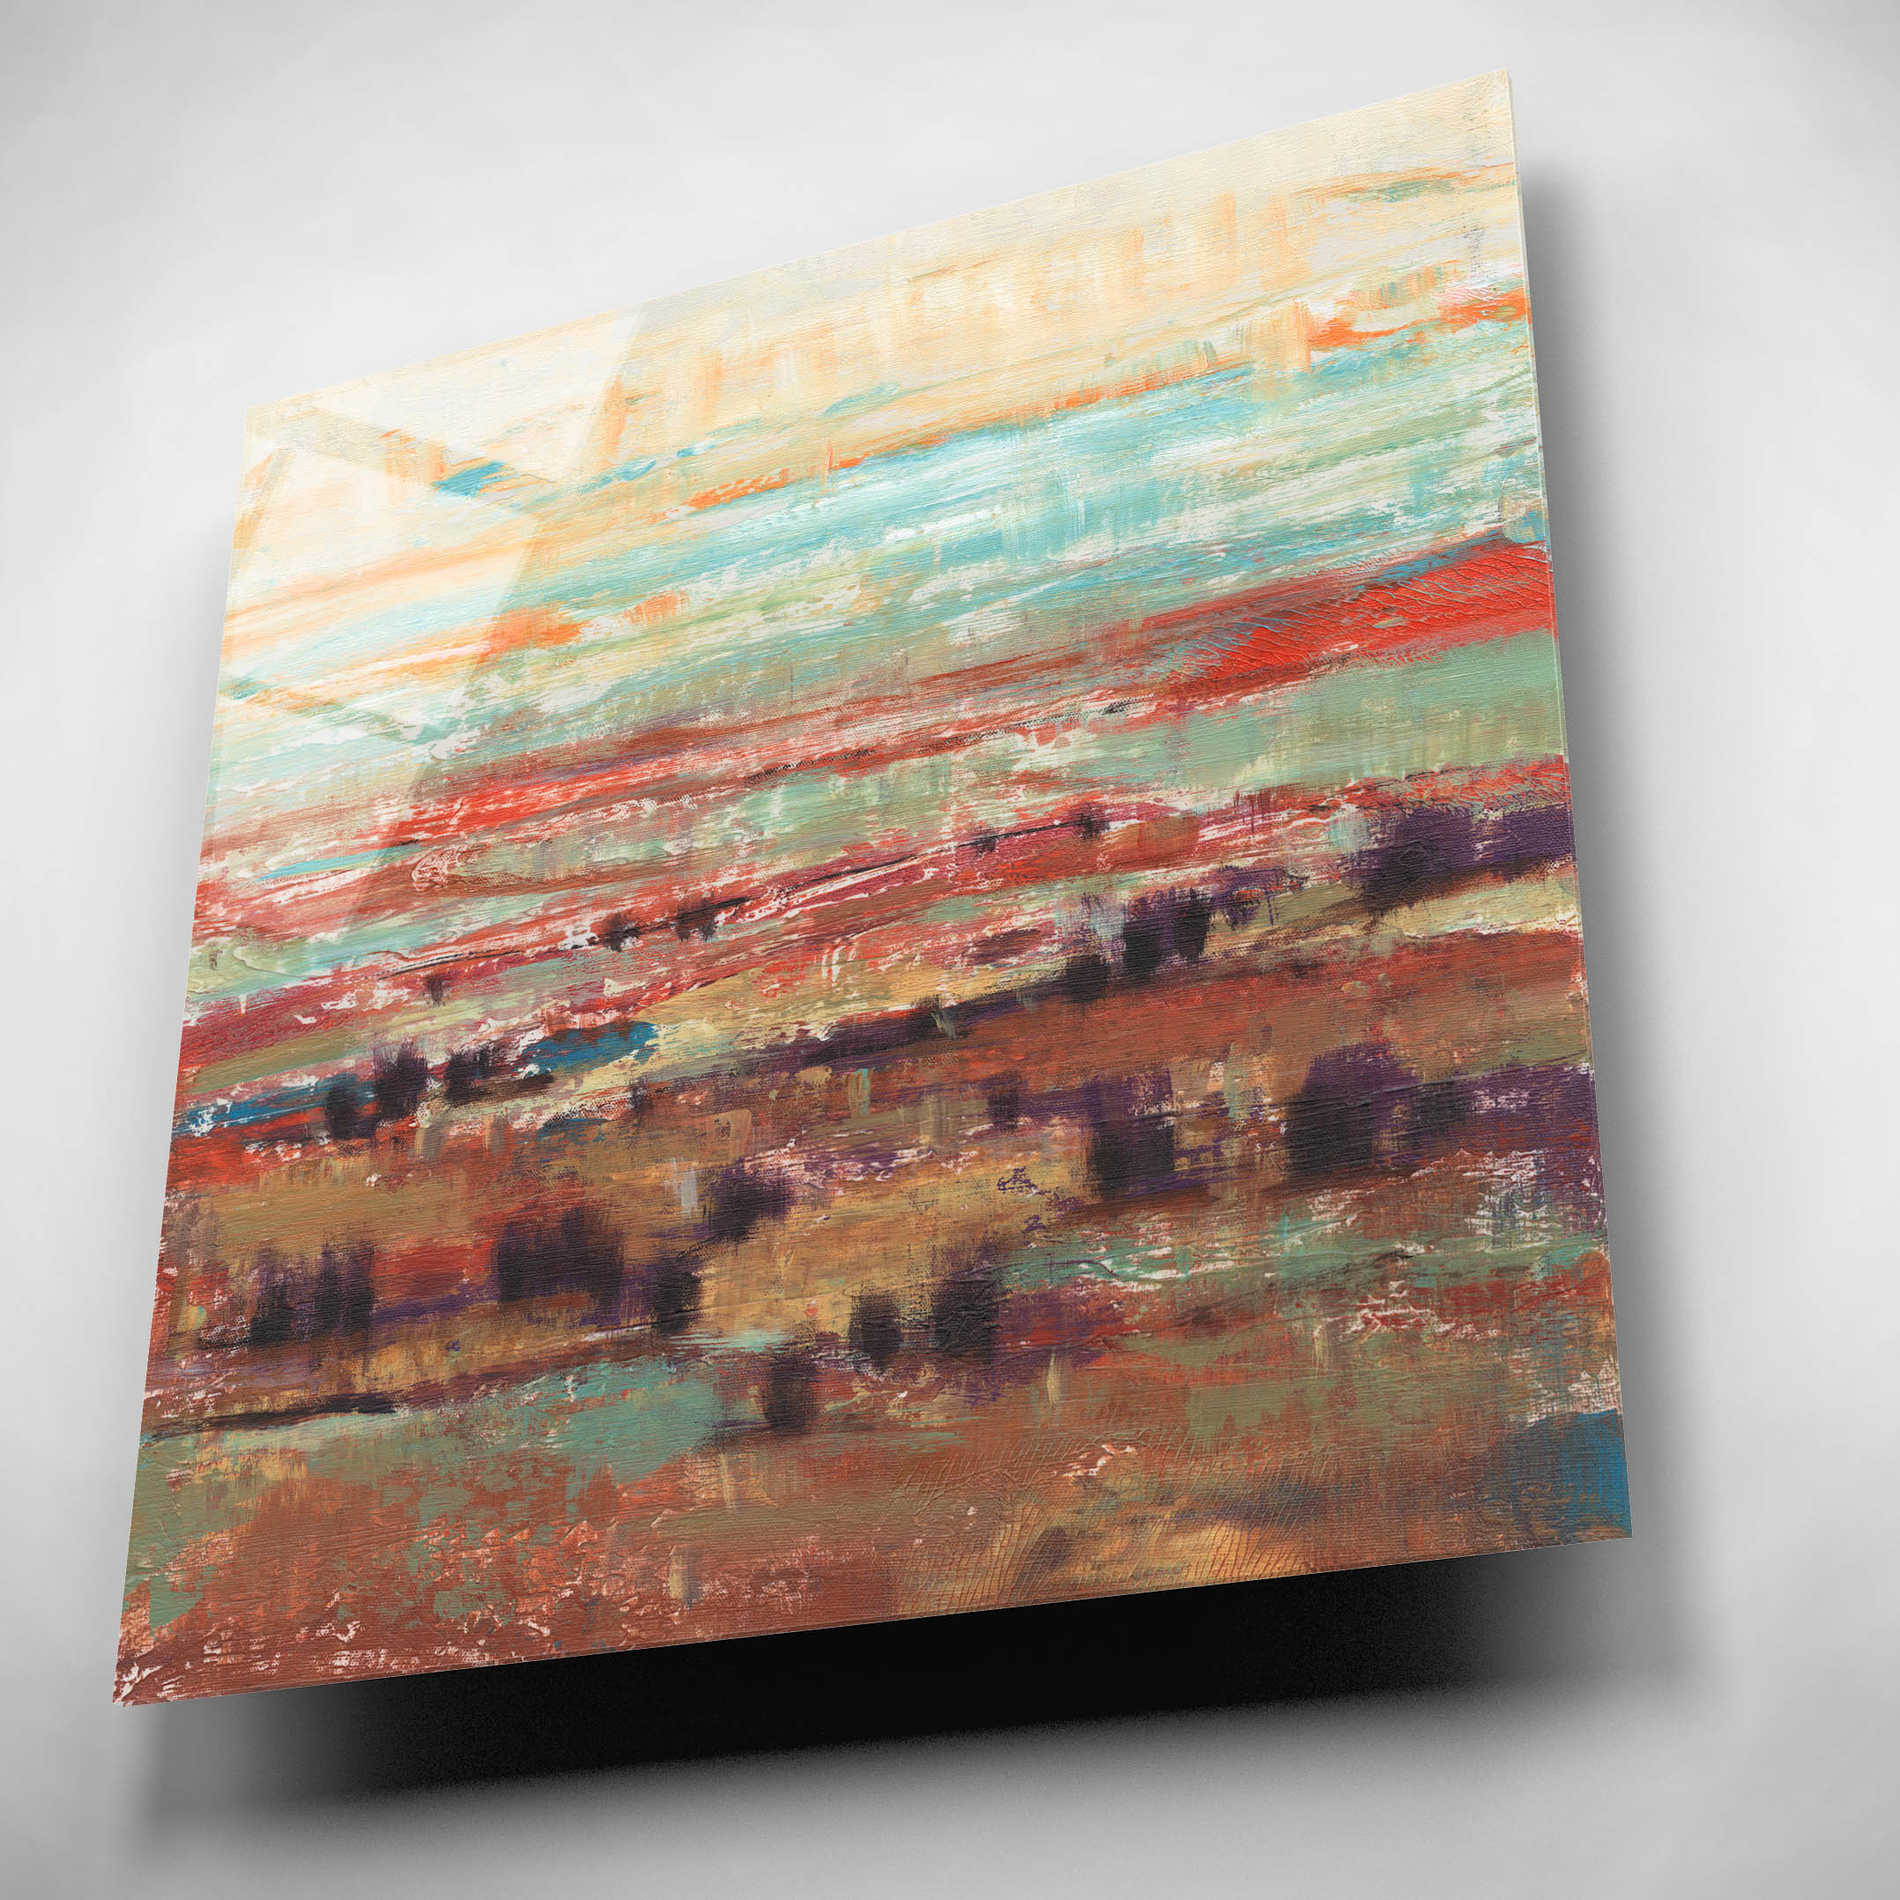 Epic Art 'Divided Landscape II' by Tim O'Toole, Acrylic Glass Wall Art,12x12